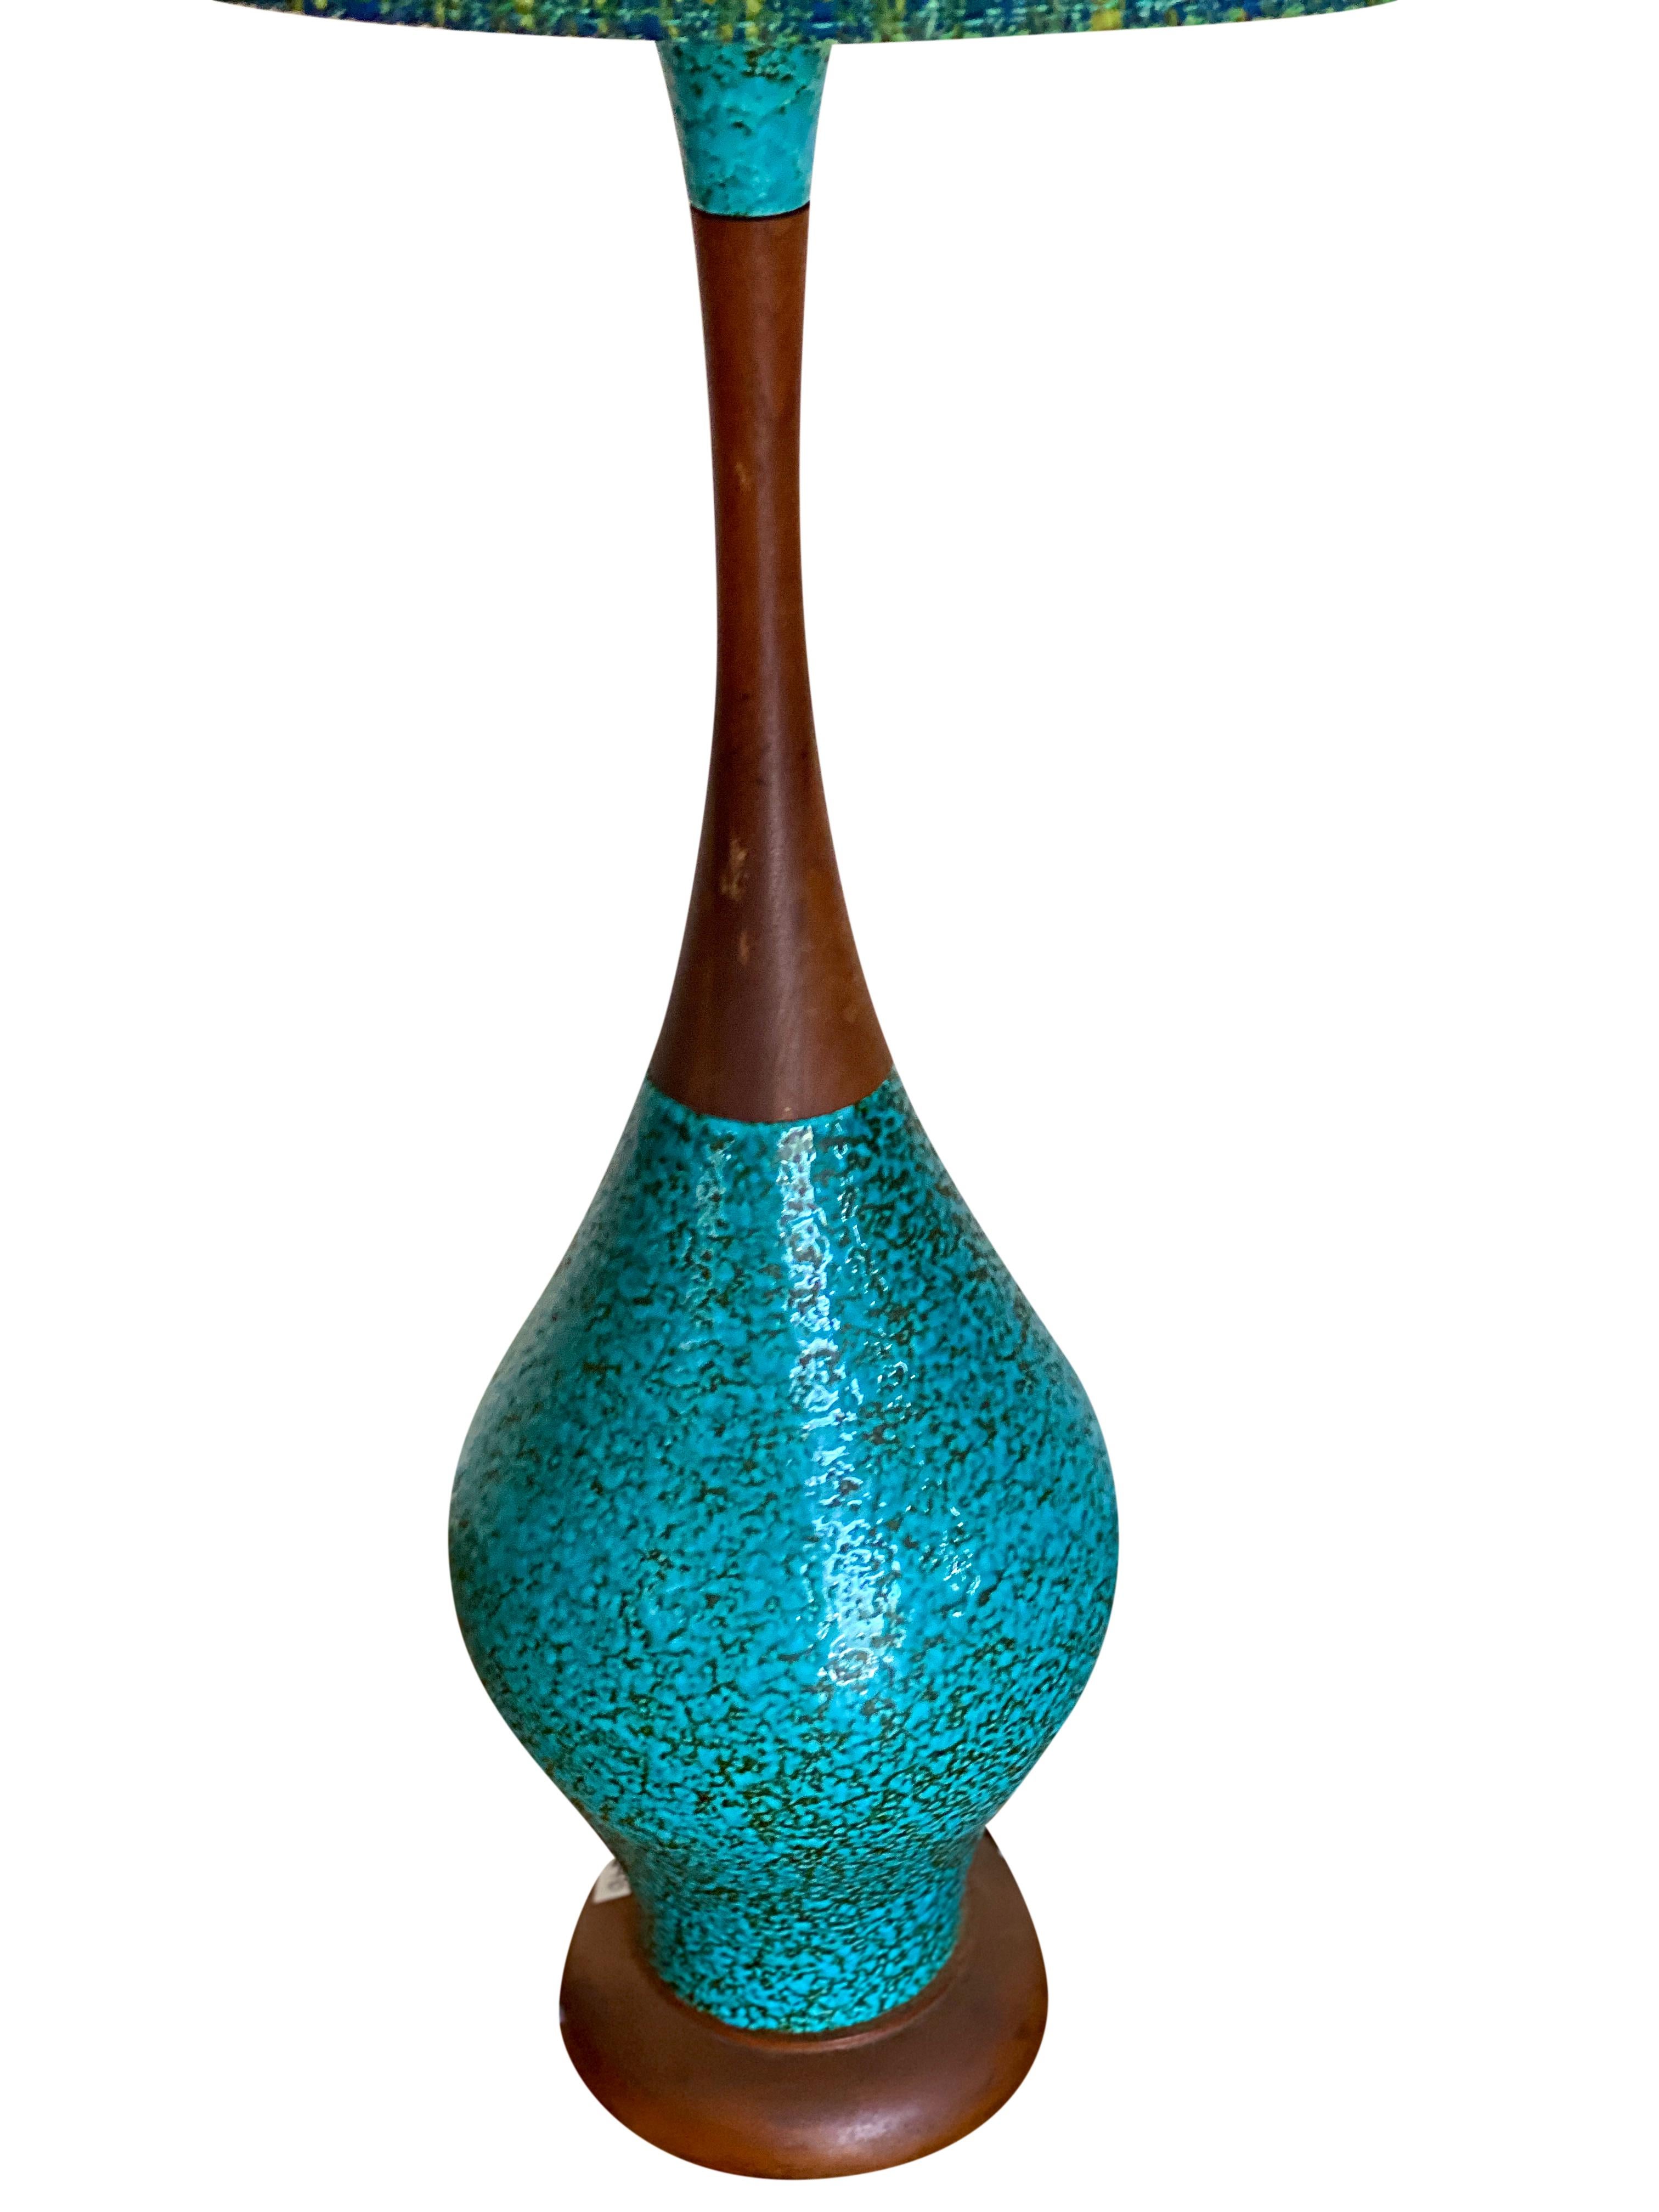 Beautiful aqua-colored ceramic and wood Mid-Century Modern lamp. This lamp has a tall elegant shape that is a great accent piece to any vignette. The lampshade is original to the lamp and is in good condition.